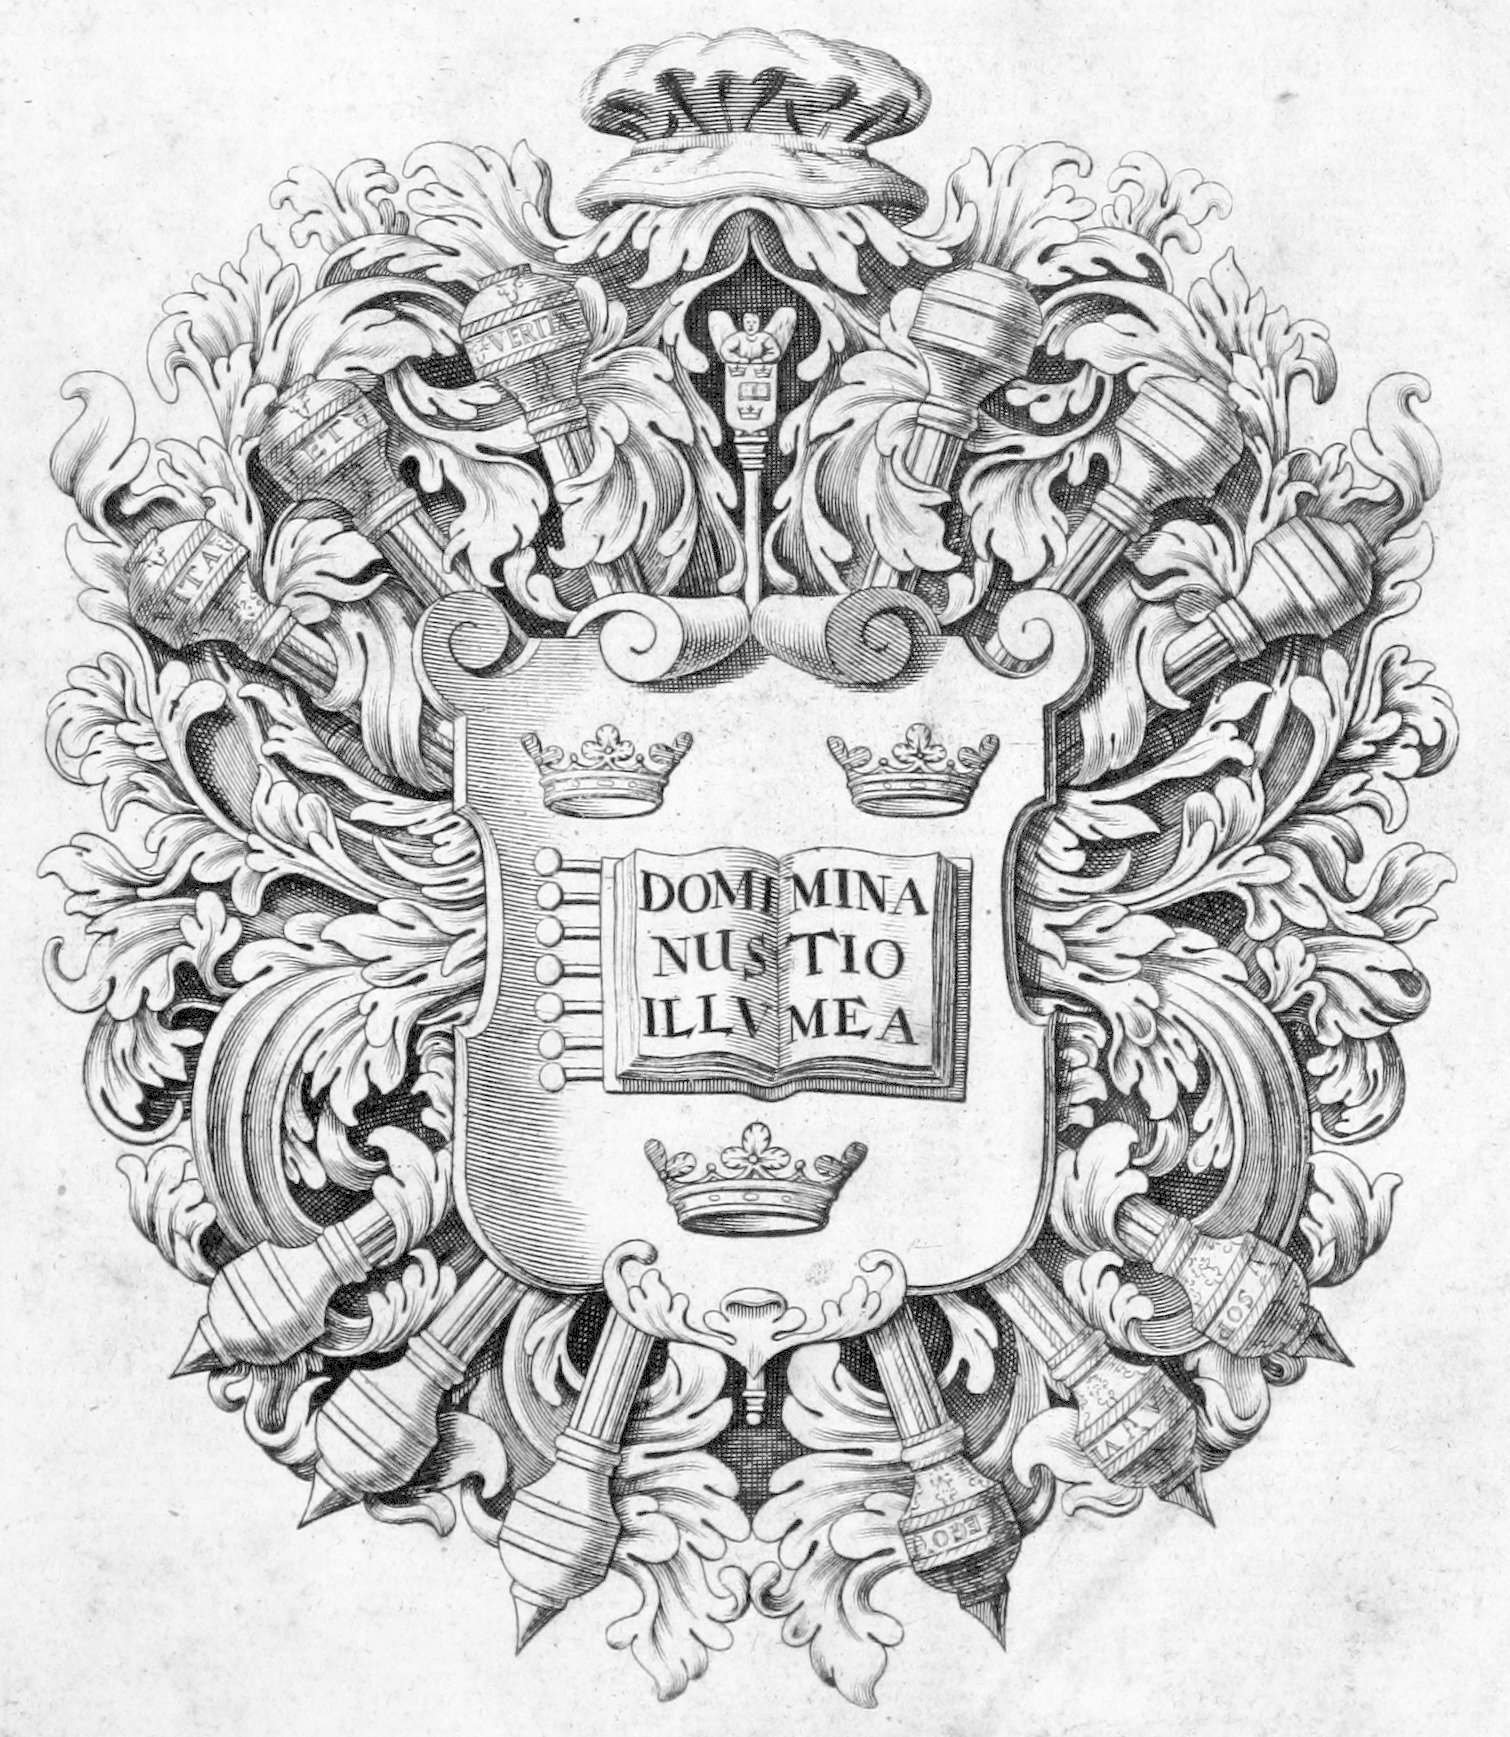 === Doctor's Bonnet in a coat of arms of the Oxford university ===

Source: https://commons.m.wikimedia.org/wiki/File:Pietas_Academi%C3%A6_Oxoniensis_in_obitum_(1738)_-_p09_COA.jpg

British Library digitised image from page 9 of 'Pietas Academiæ Oxoniensis in obitum ... Reginæ Carolinæ'

Title: Pietas Academiæ Oxoniensis in obitum ... Reginæ Carolinæ
Author(s): University of Oxford [organisation]
British Library shelfmark: 'Digital Store 644.m.12. (1.)'
Page: 9 (scanned page number - not necessarily the actual page number in the publication)
Place of publication: Oxonii
Date of publication: 1738
Type of resource: Monograph
Language(s): English
Physical description: (folio)